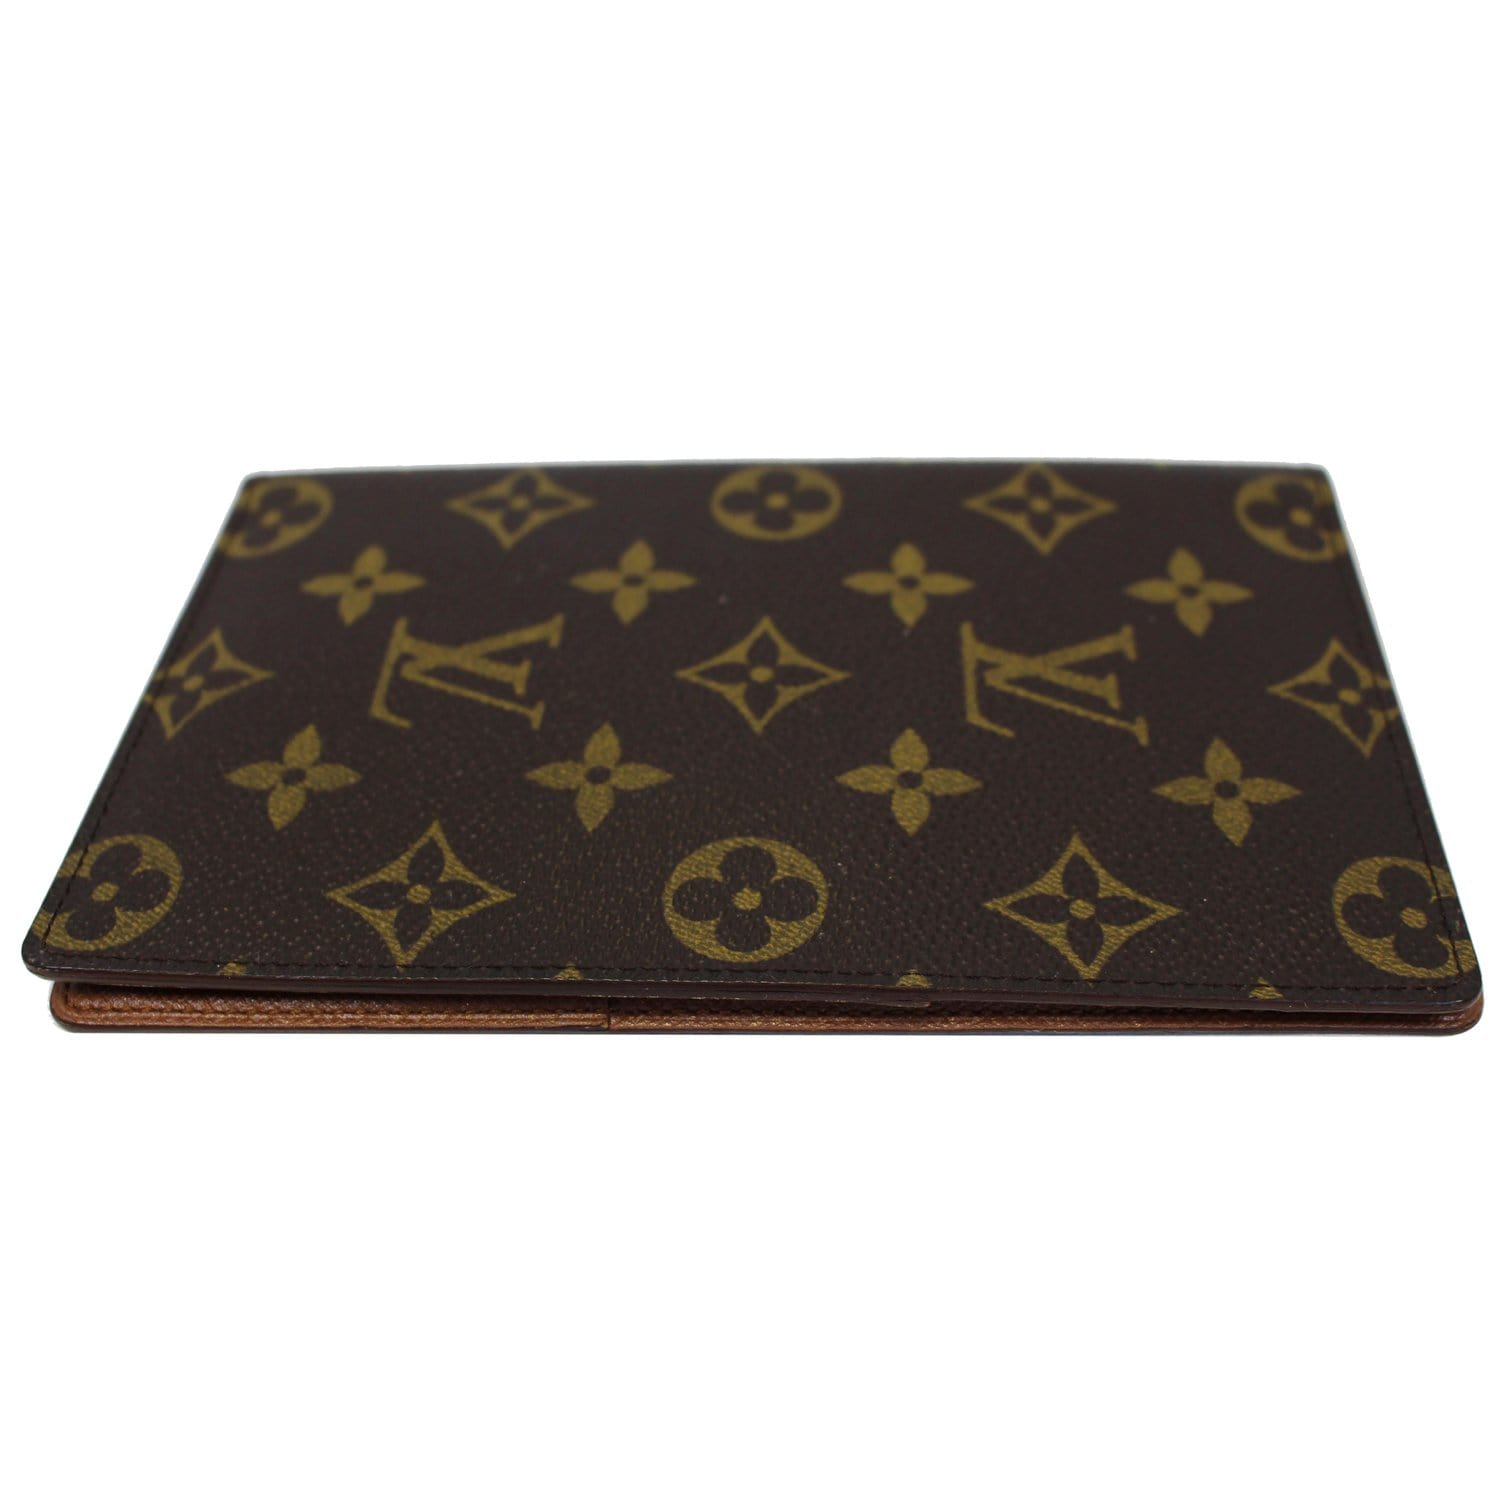 Louis Vuitton Passport Cover, Brown, One Size